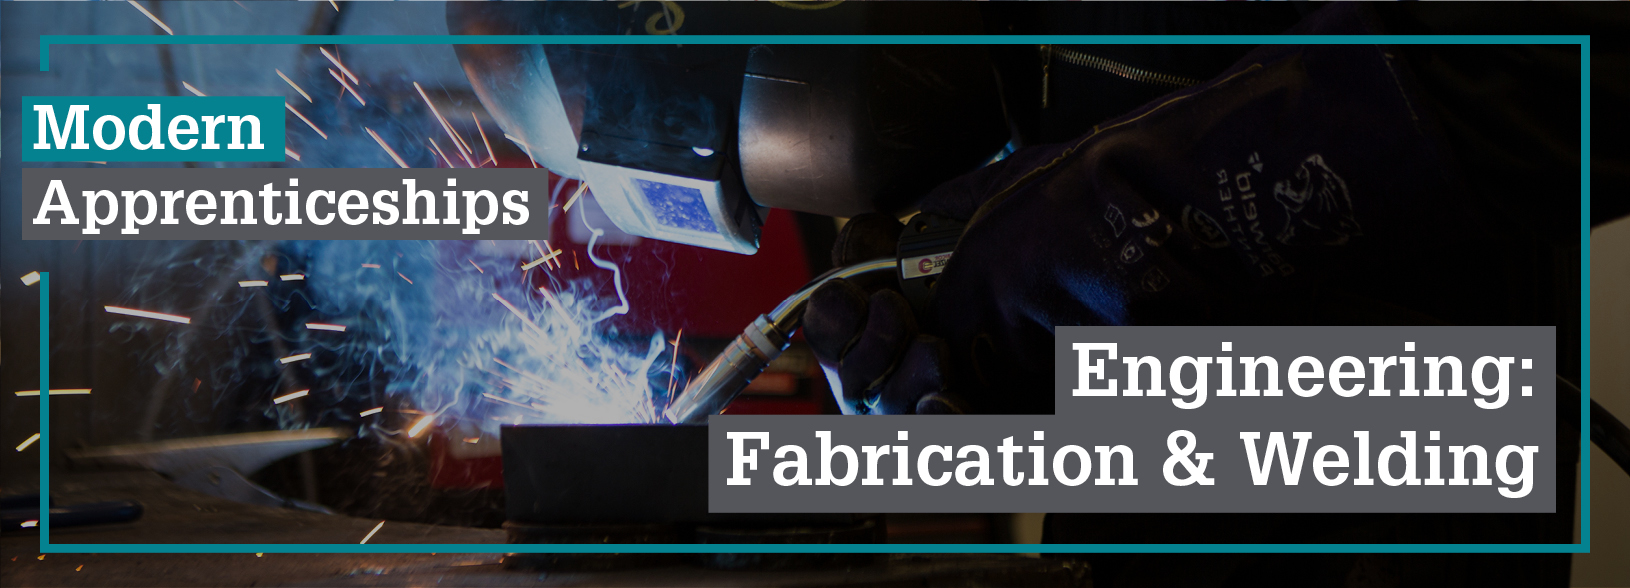 Modern Apprenticeship in Fabrication and Welding